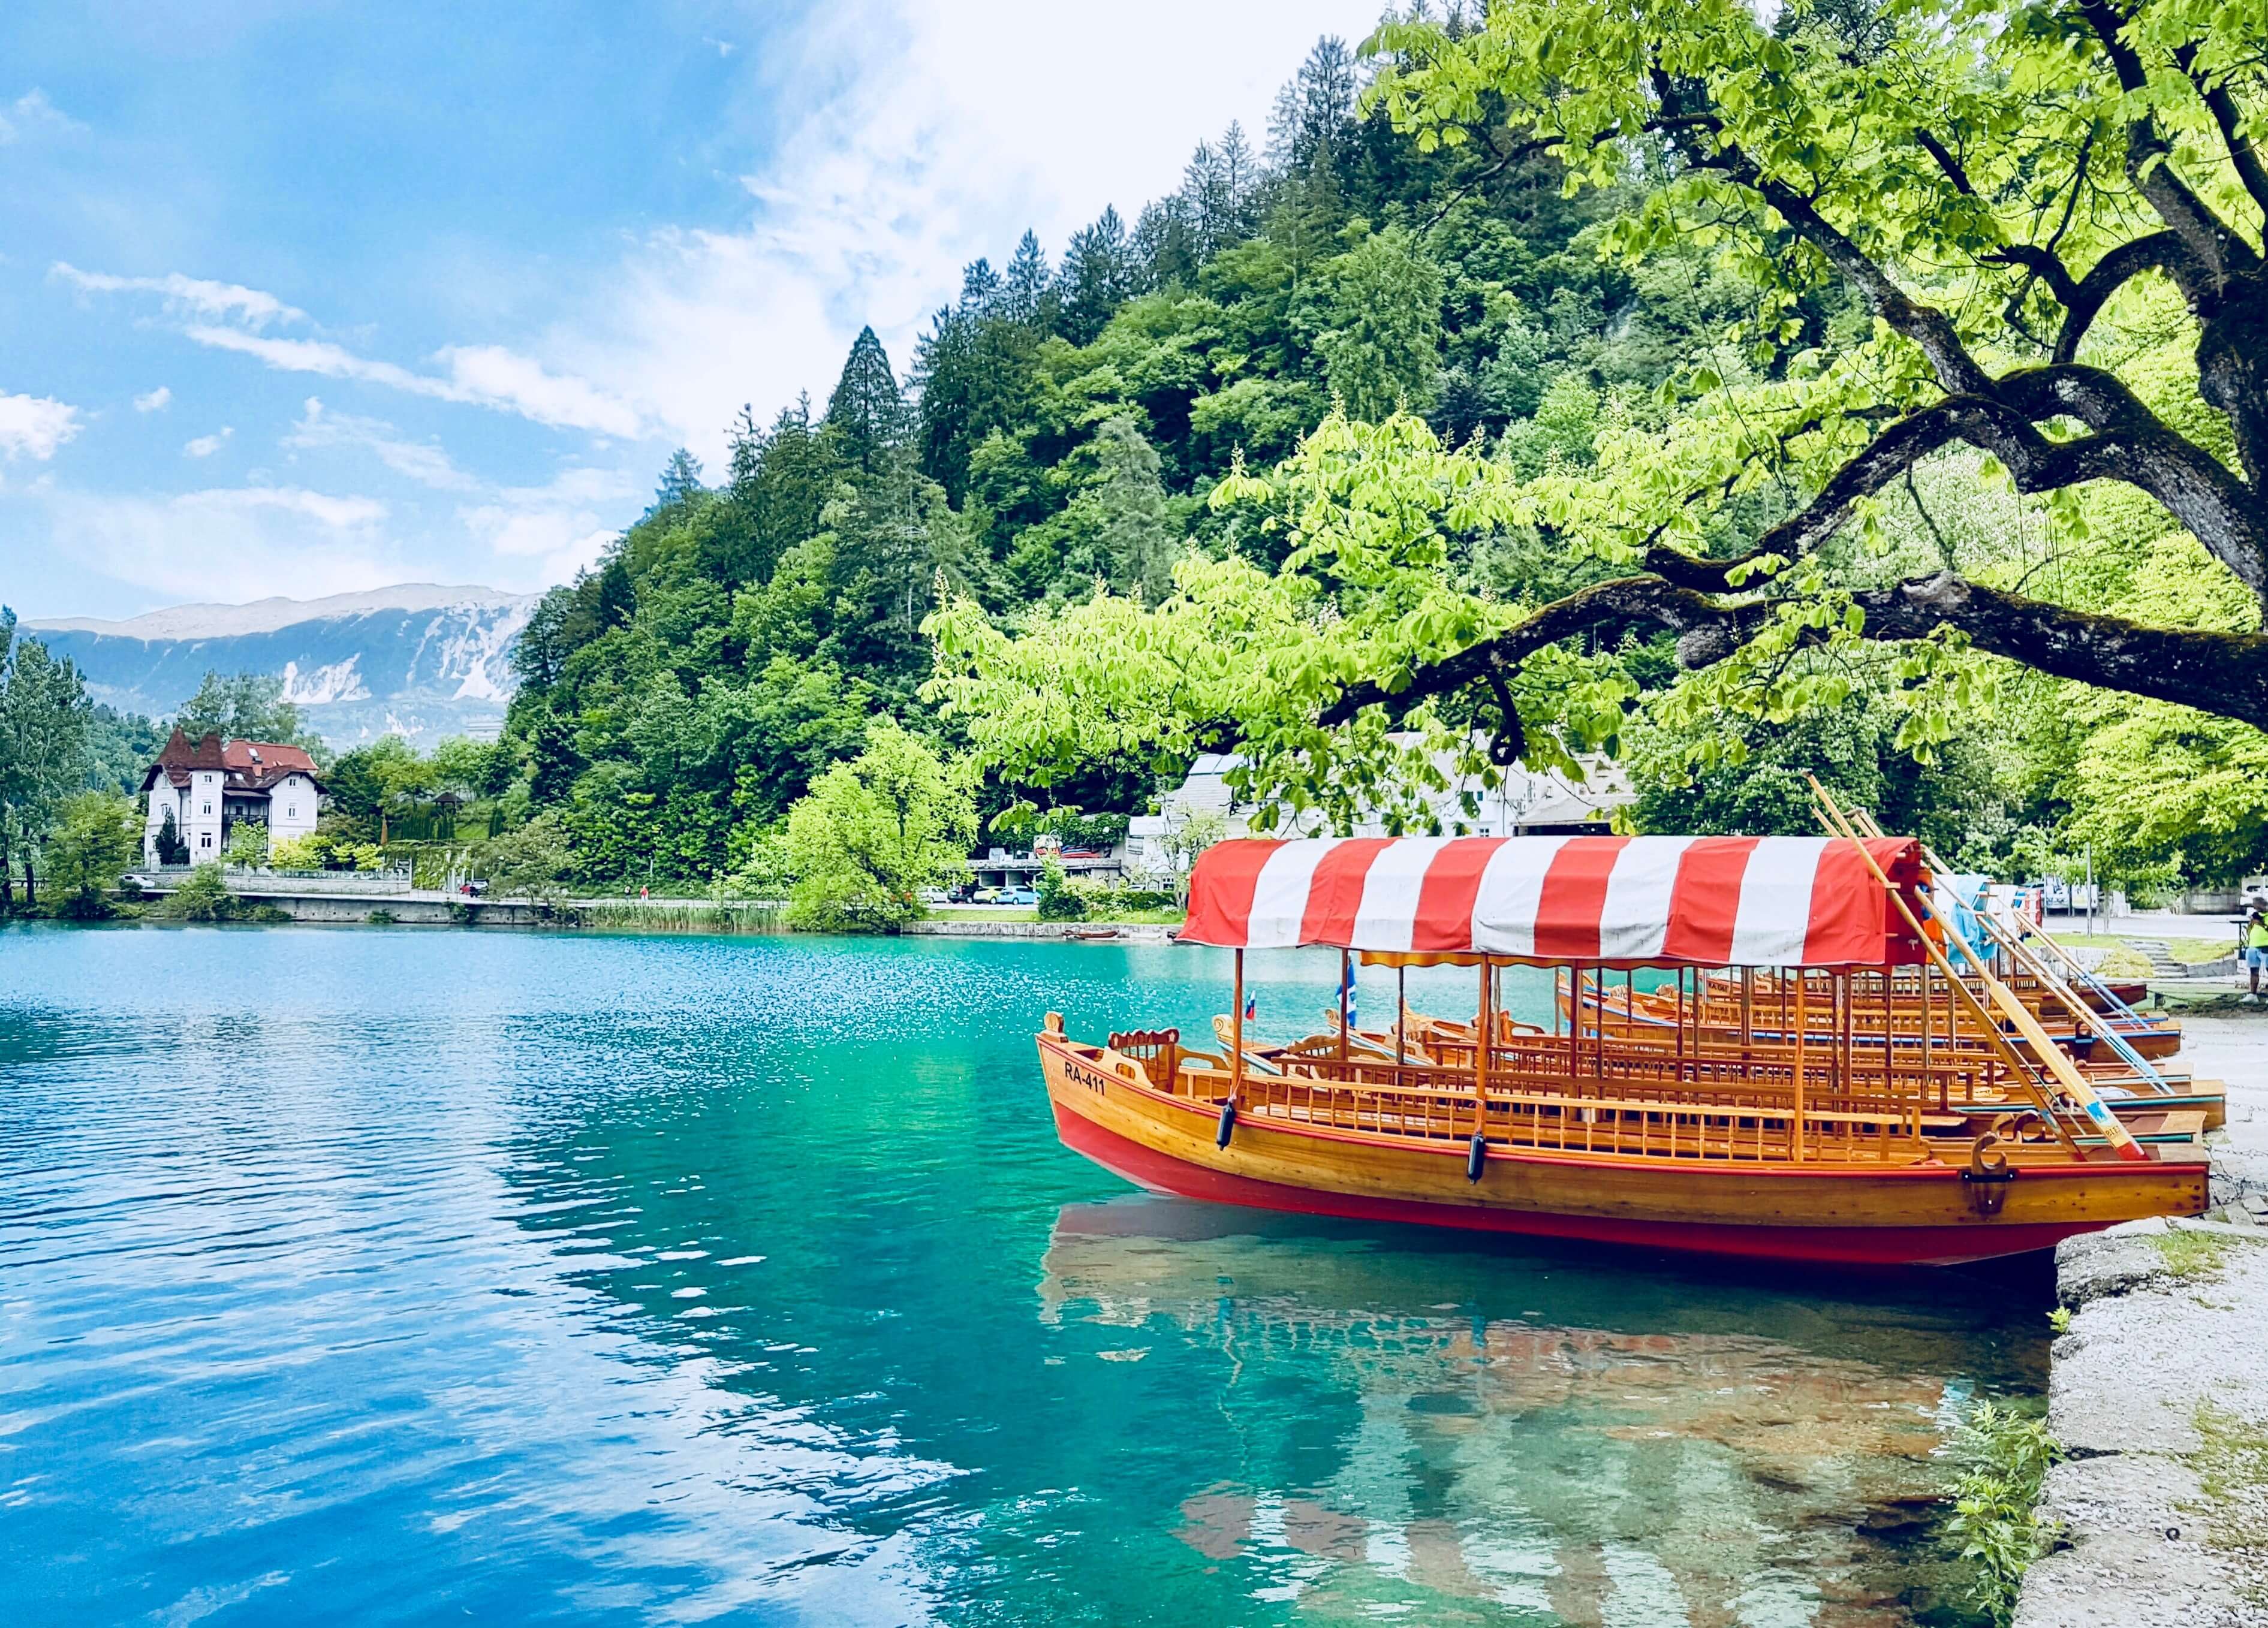 An image of a boat on Lake Bled in Slovenia